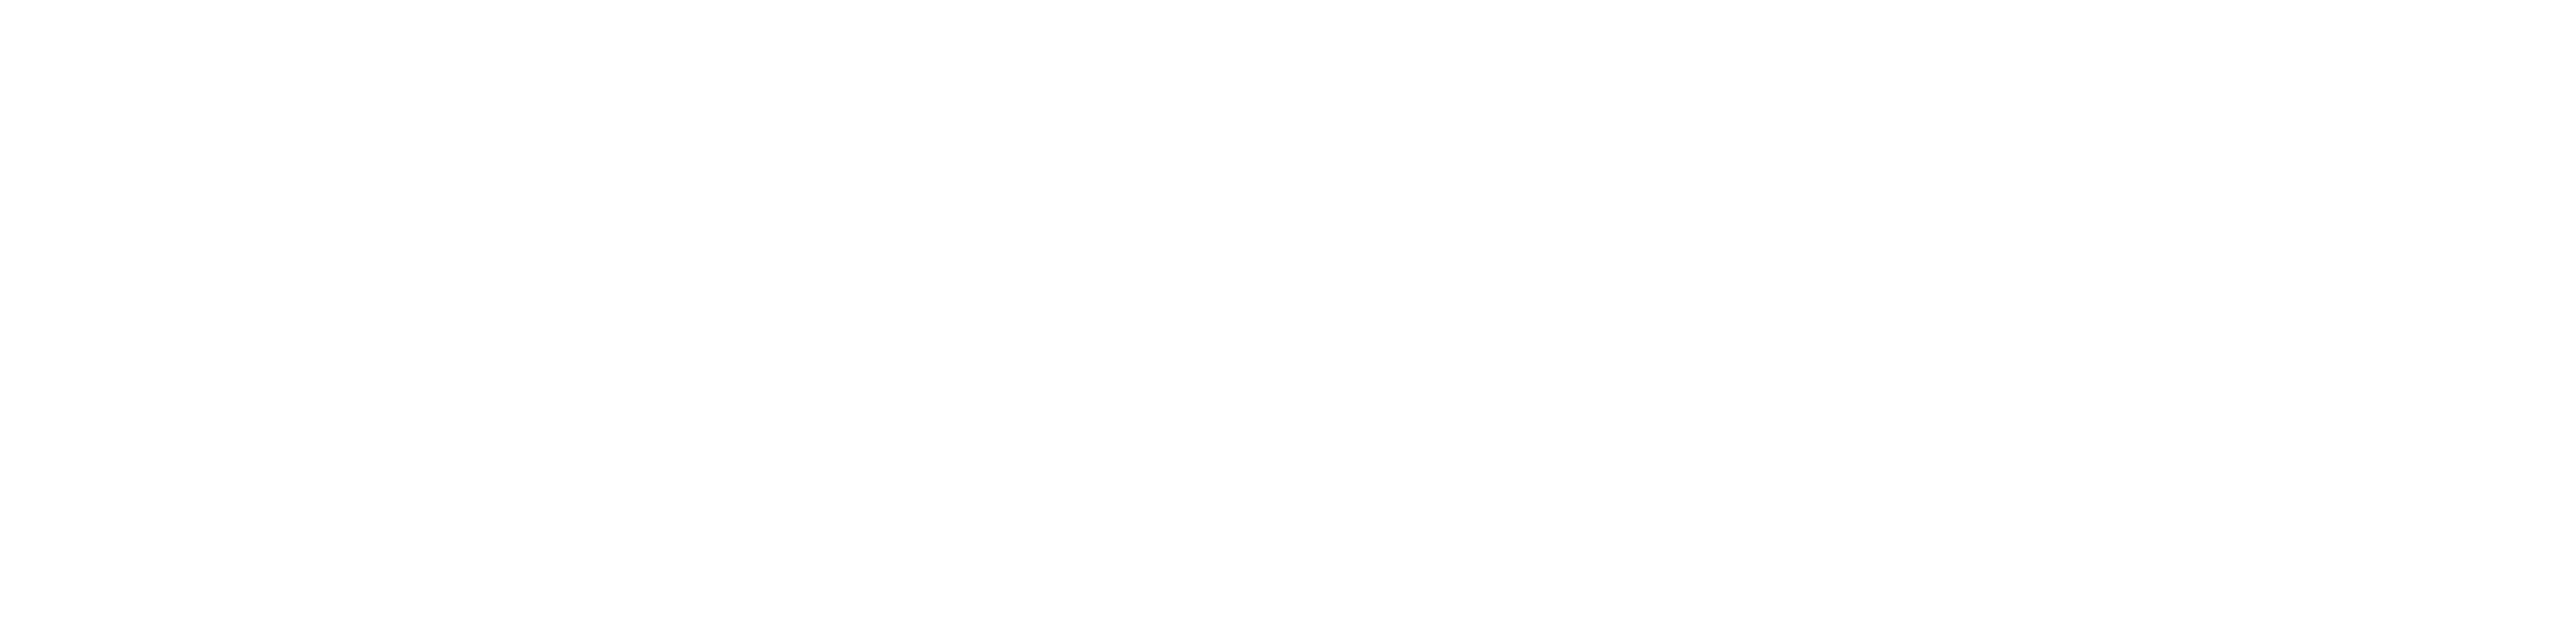 Richmond Volleyball Community Division